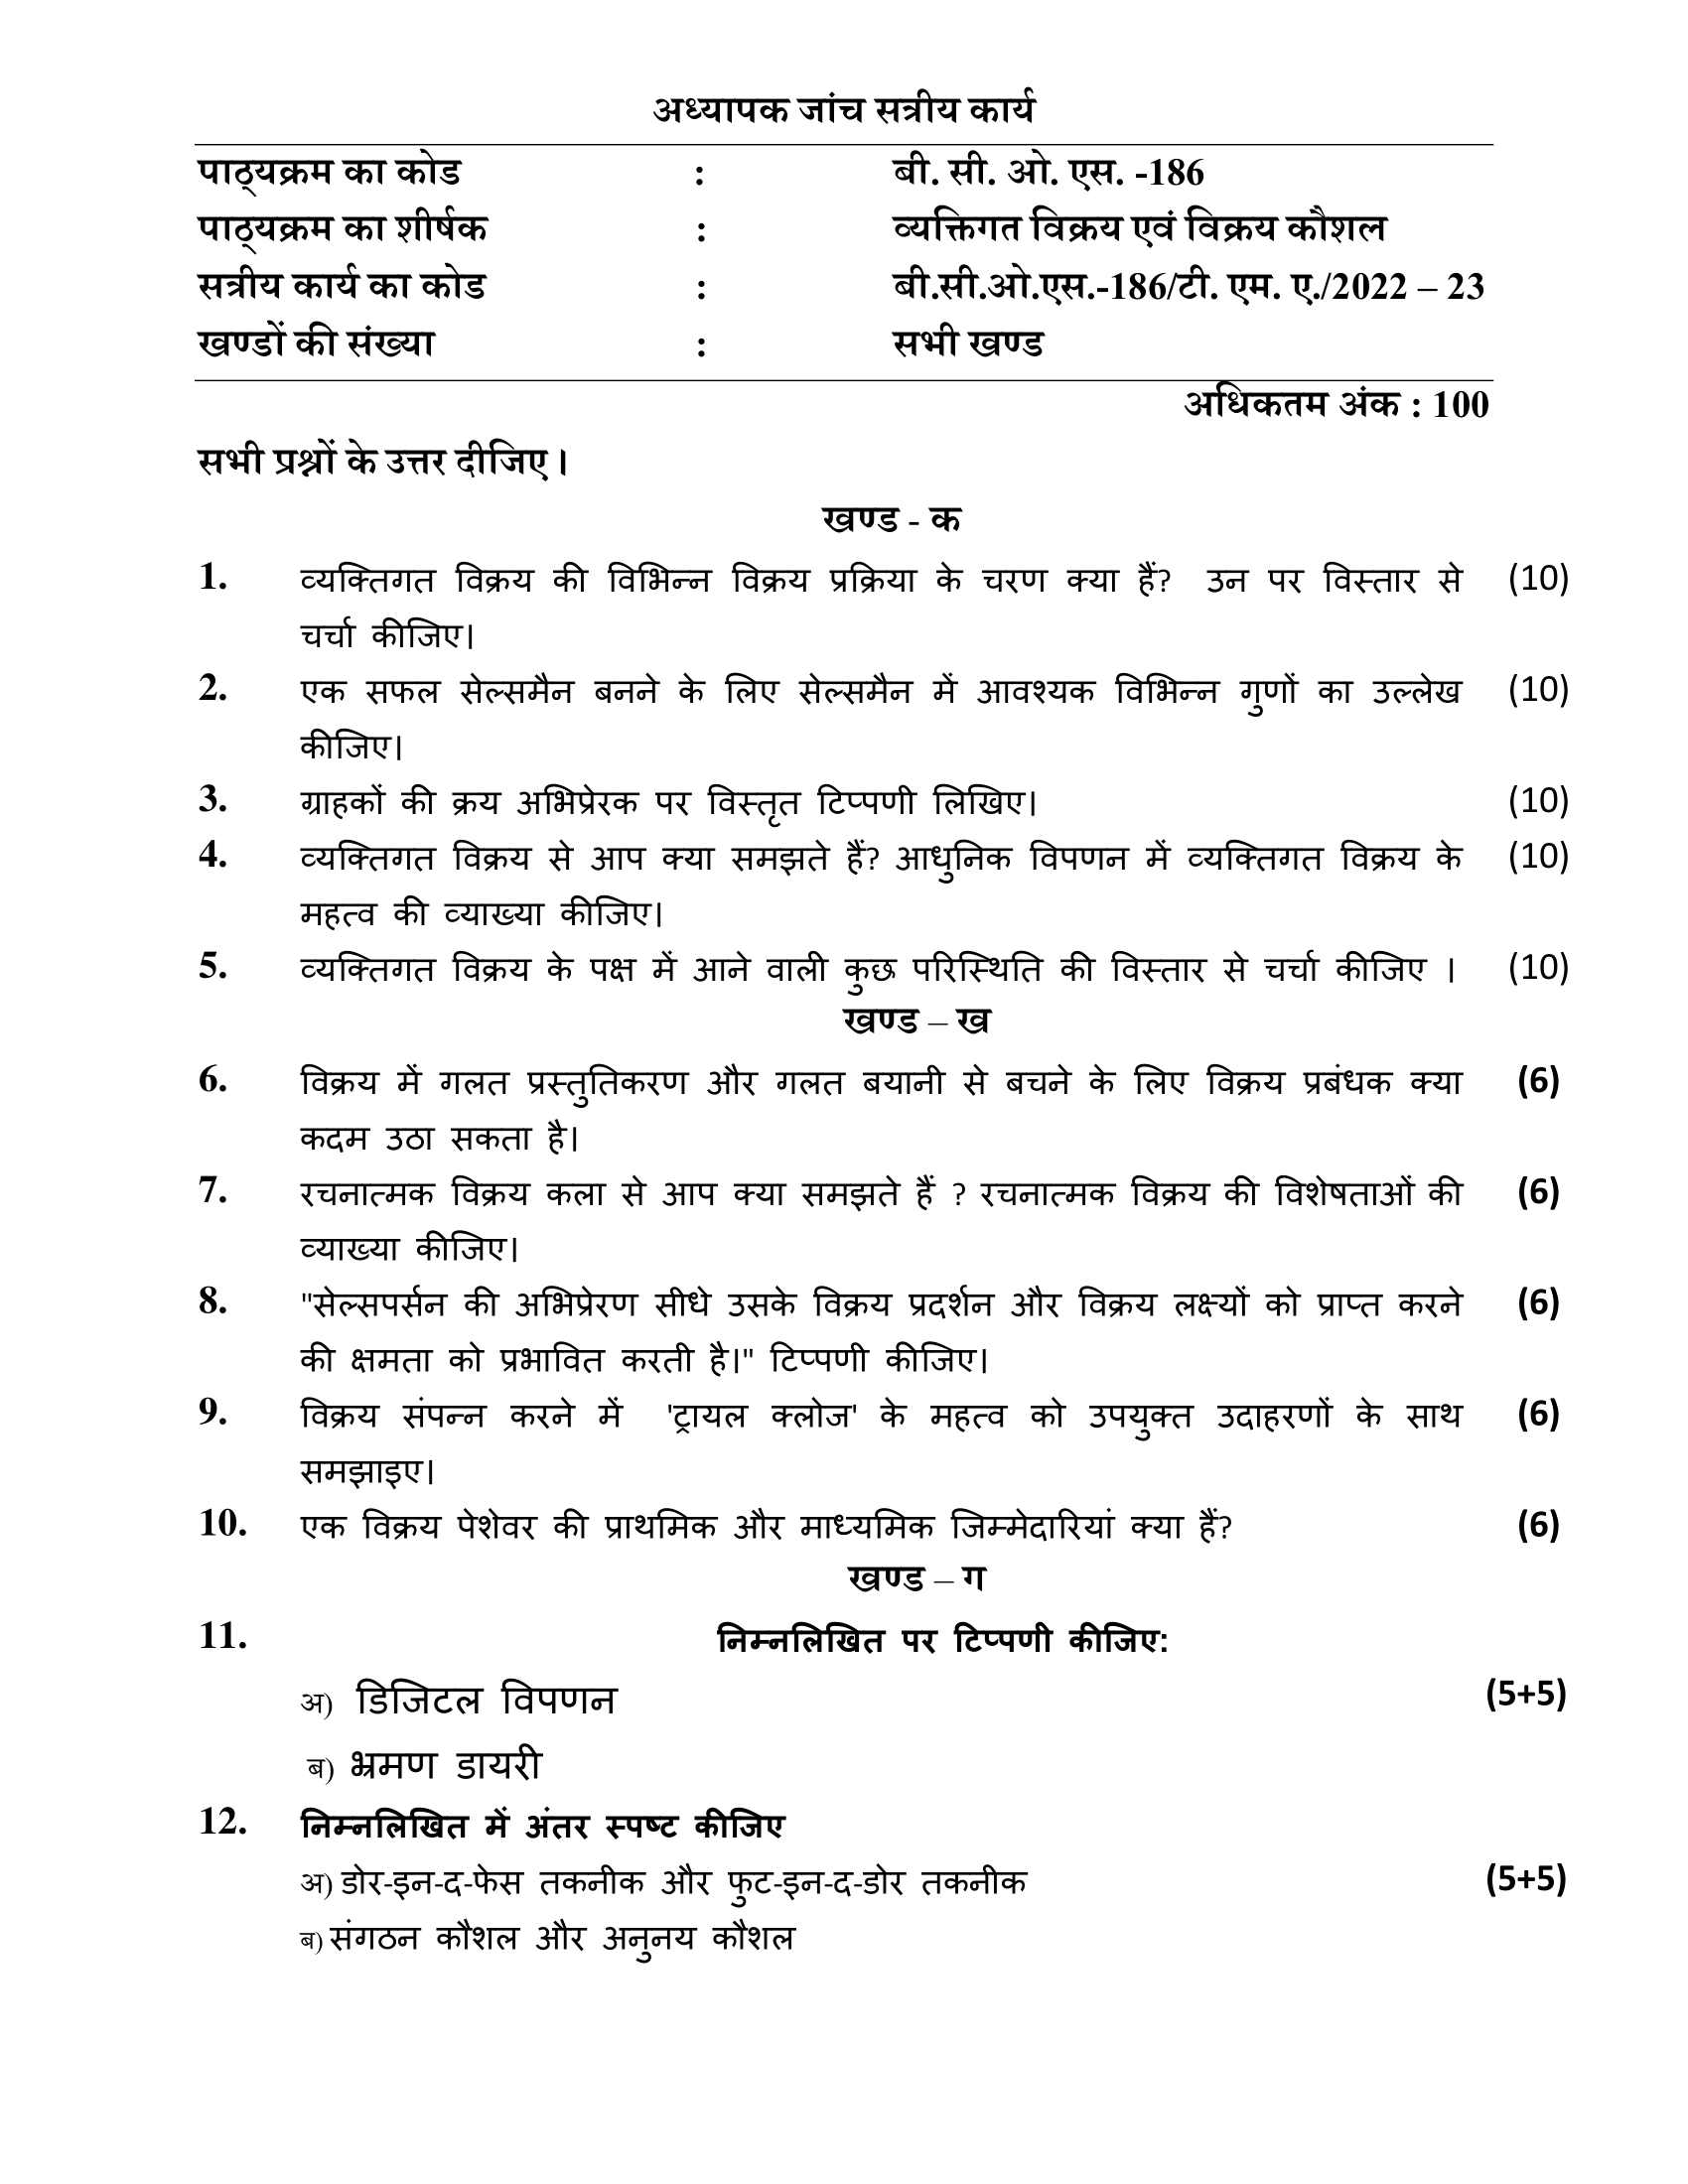 bcos 186 assignment pdf in hindi